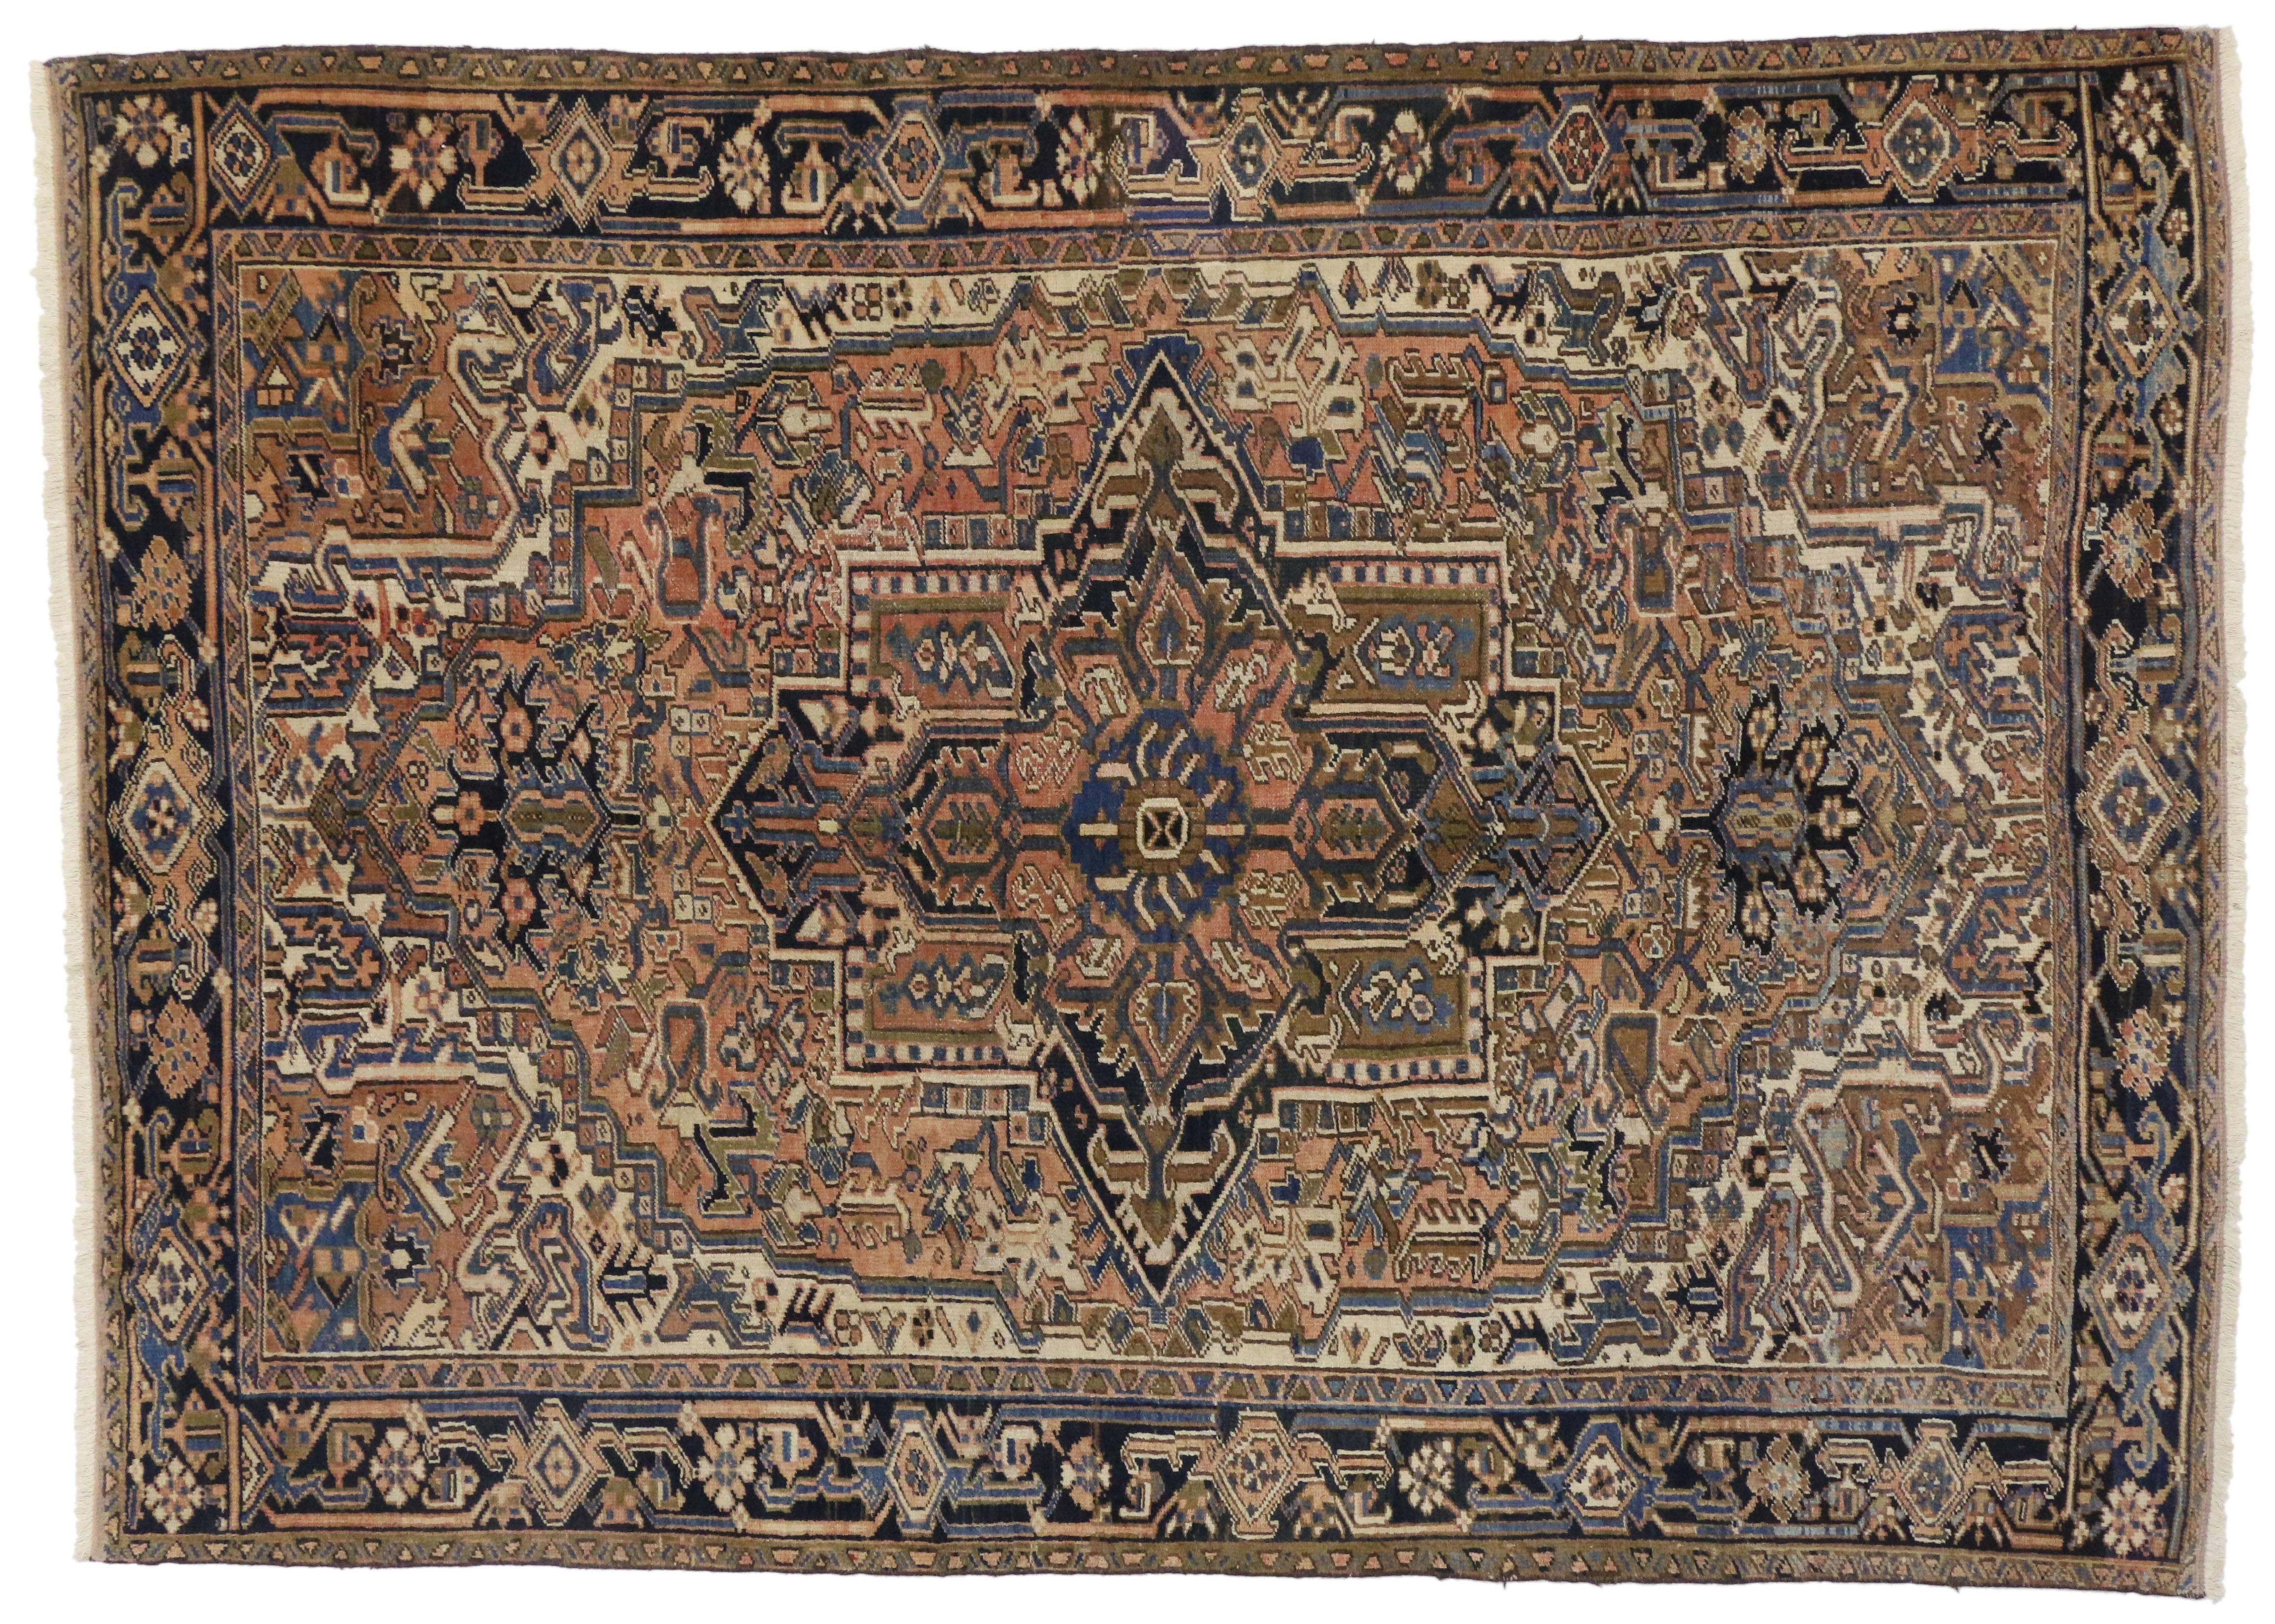 76320 Vintage Persian Heriz Rug with Rustic Mid-Century Modern Style 07'01 x 10'00. With its timeless design and understated elegance with rustic sensibility, this hand-knotted wool vintage Persian Heriz rug takes on a curated lived-in look that